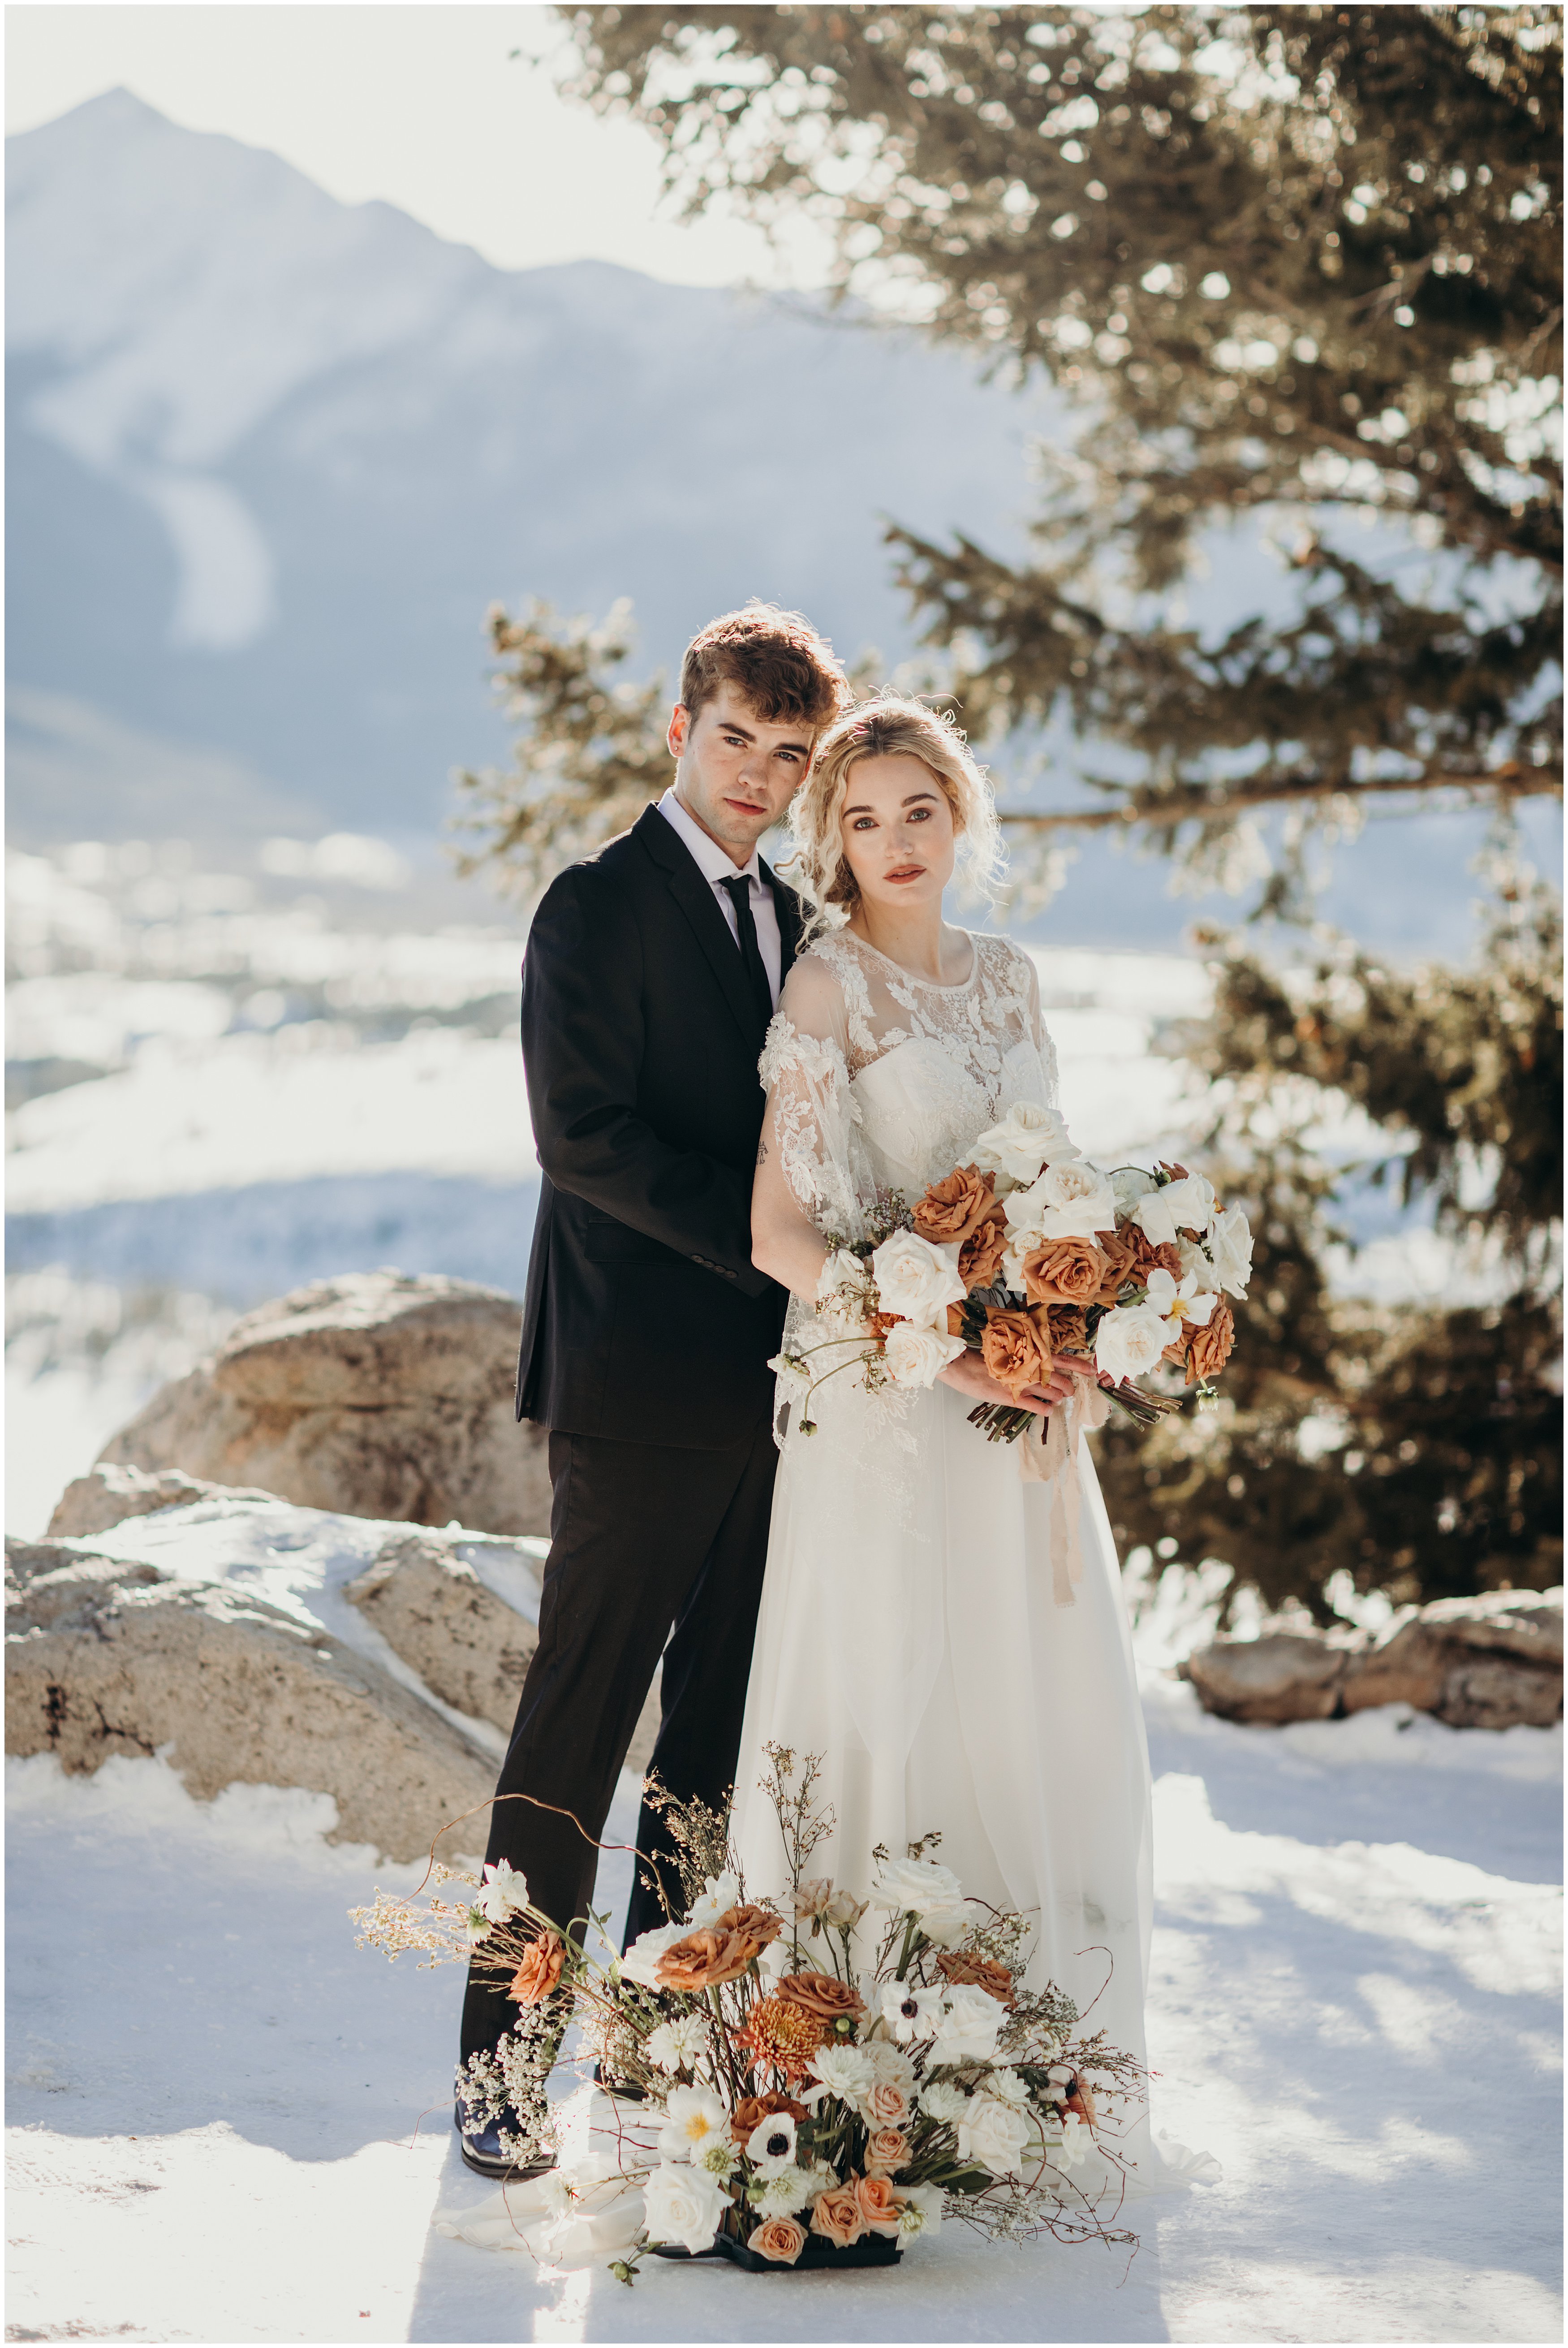 Sapphire point elopement, eloping at Sapphire Point, Sapphire Point overlook, Colorado elopement photographer, Colorado wedding photographer, winter elopement at sapphire point, how to elope sapphire point, elopement locations colorado, elopement locations breckenridge, elopement locations keystone, best elopement locations, sapphire point elopement guide, tips for eloping in sapphire point, how many people are allowed at a sapphire point elopement